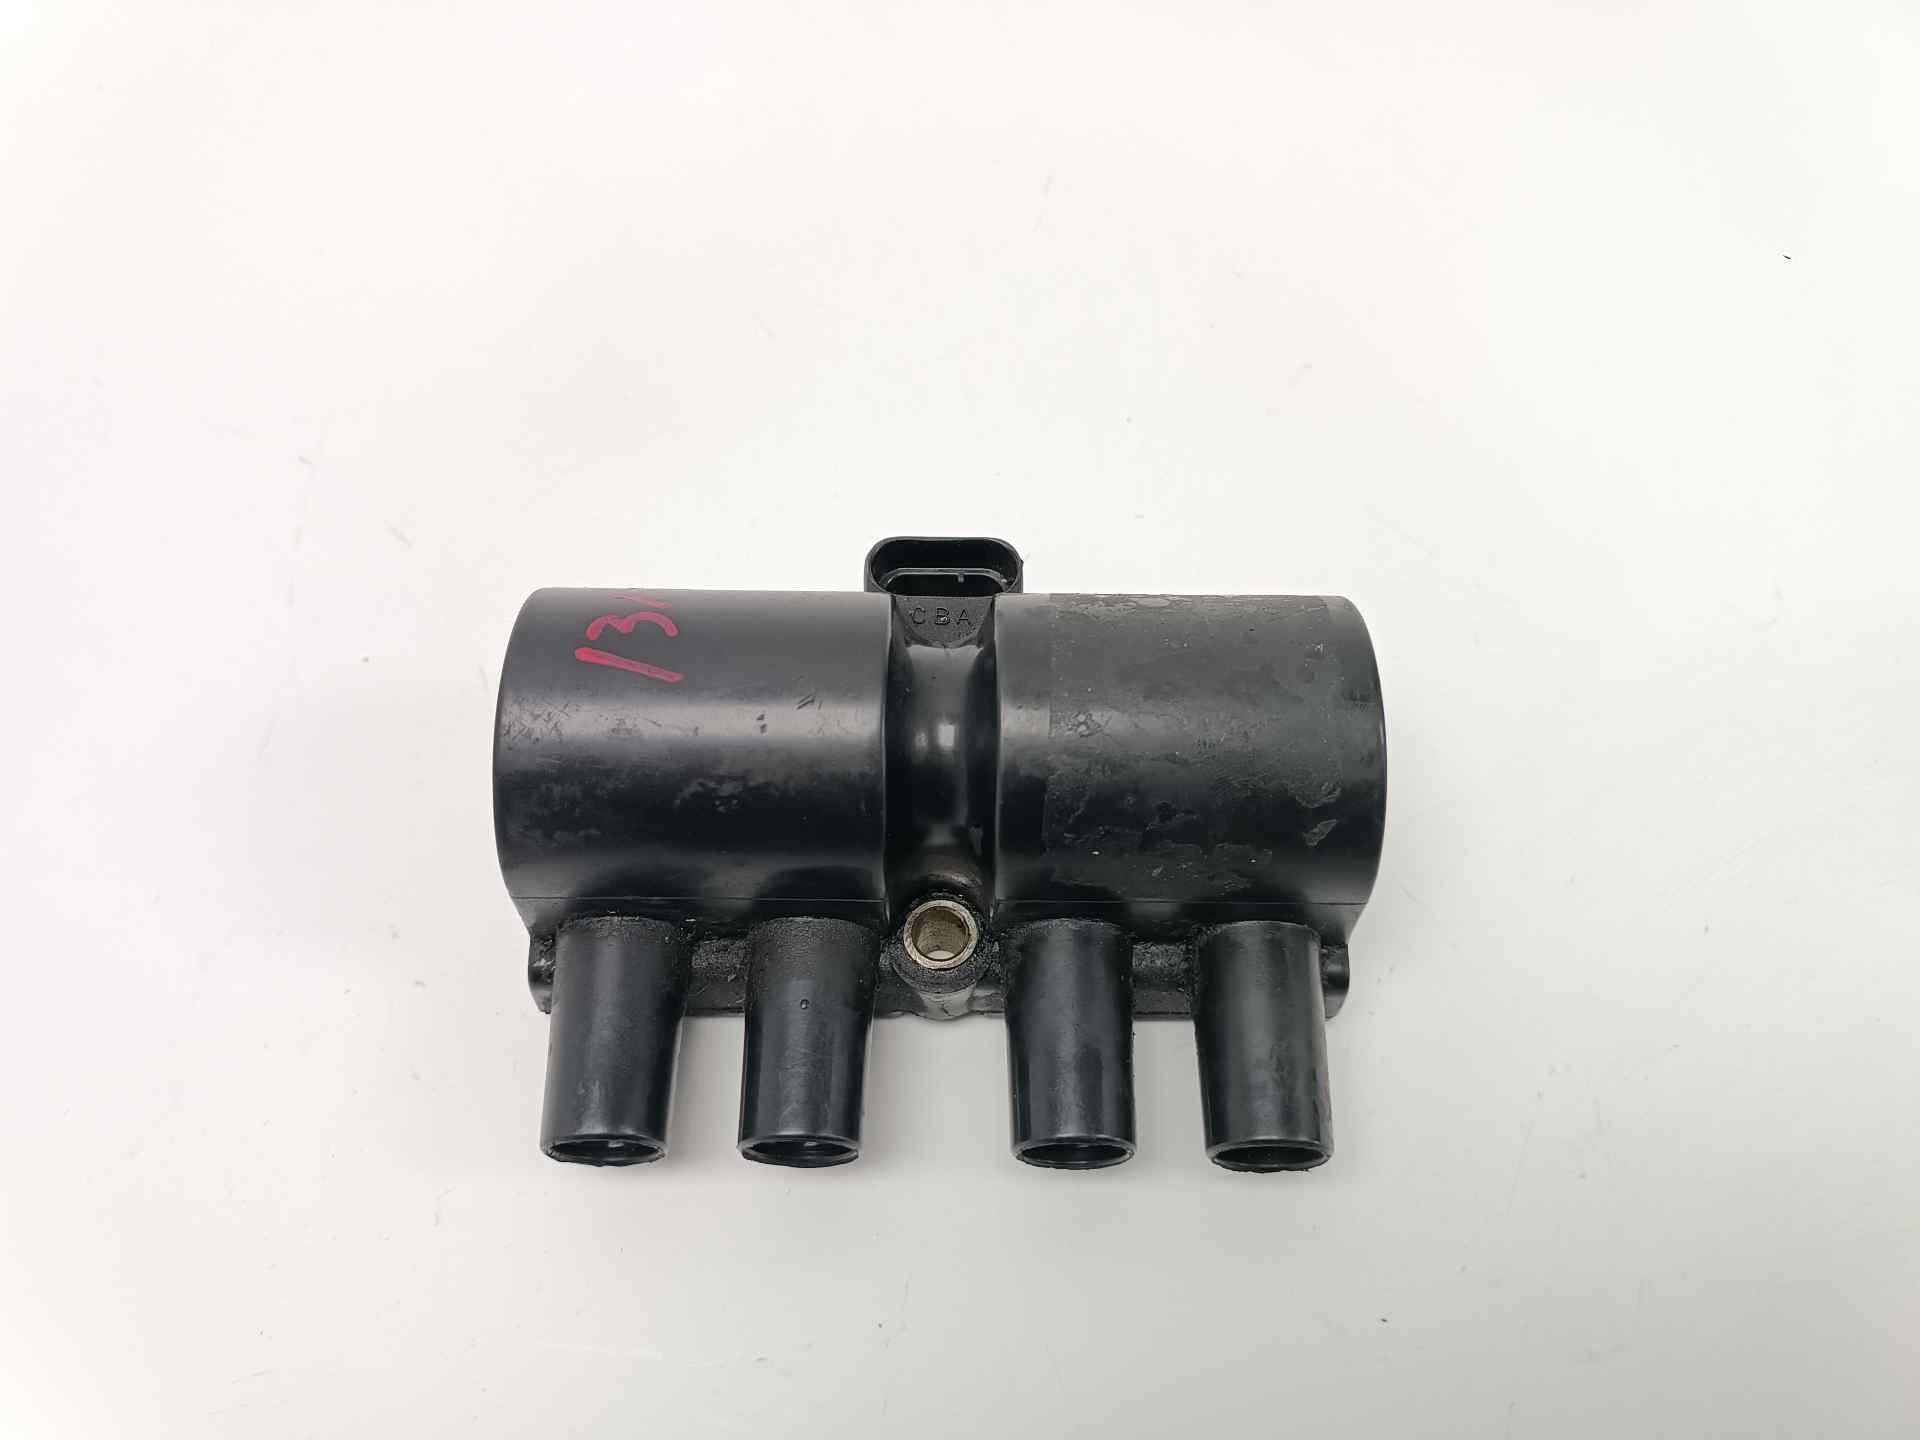 SAAB 900 2 generation (1993-1998) High Voltage Ignition Coil 15327, 15327, 5708 24579351